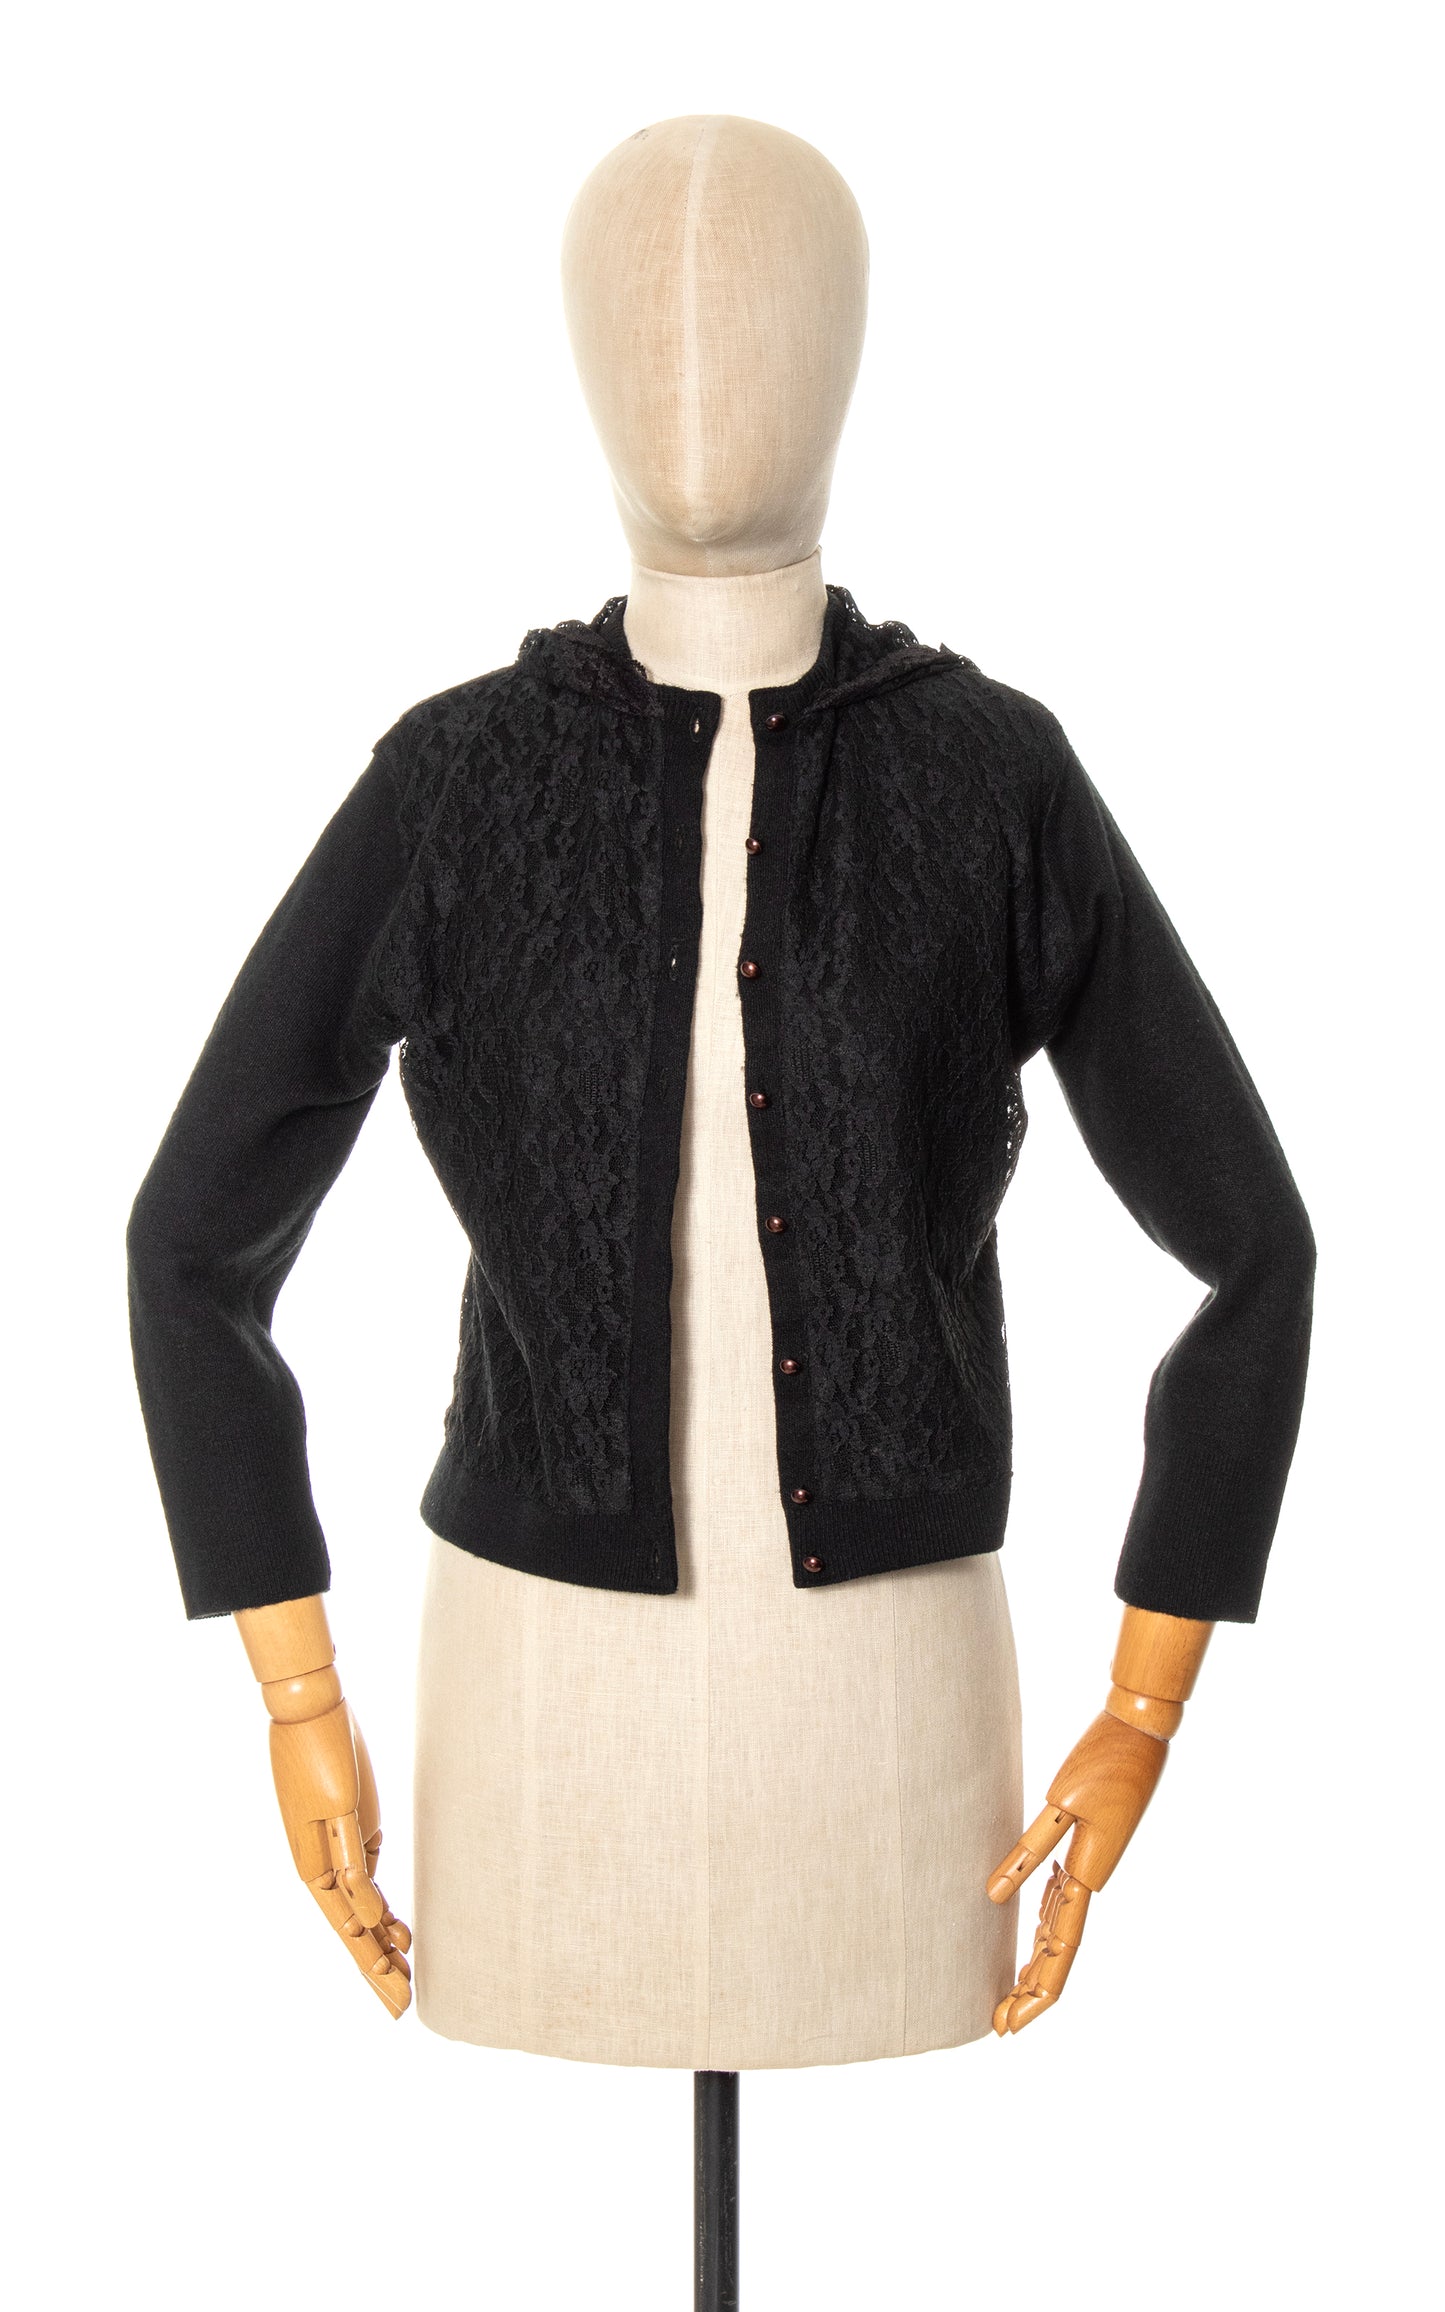 1950s Hooded Lace Knit Cardigan | small/medium